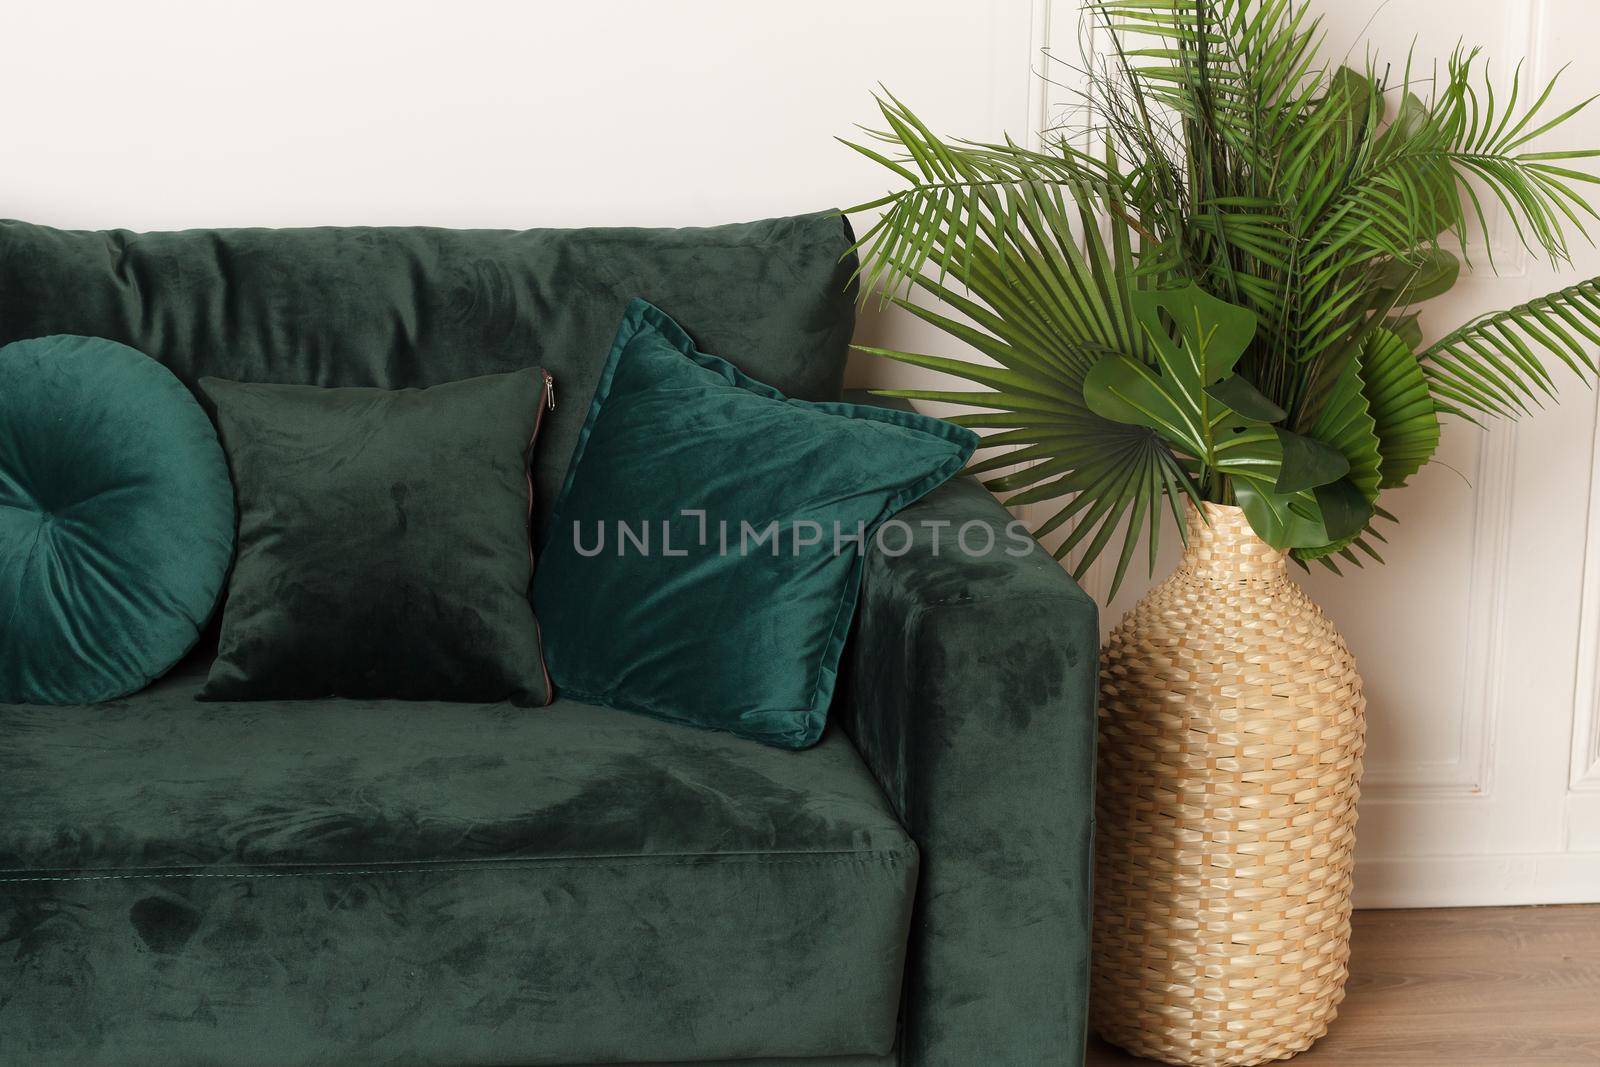 Luxurious green sofa with a plant in the interior by lara29